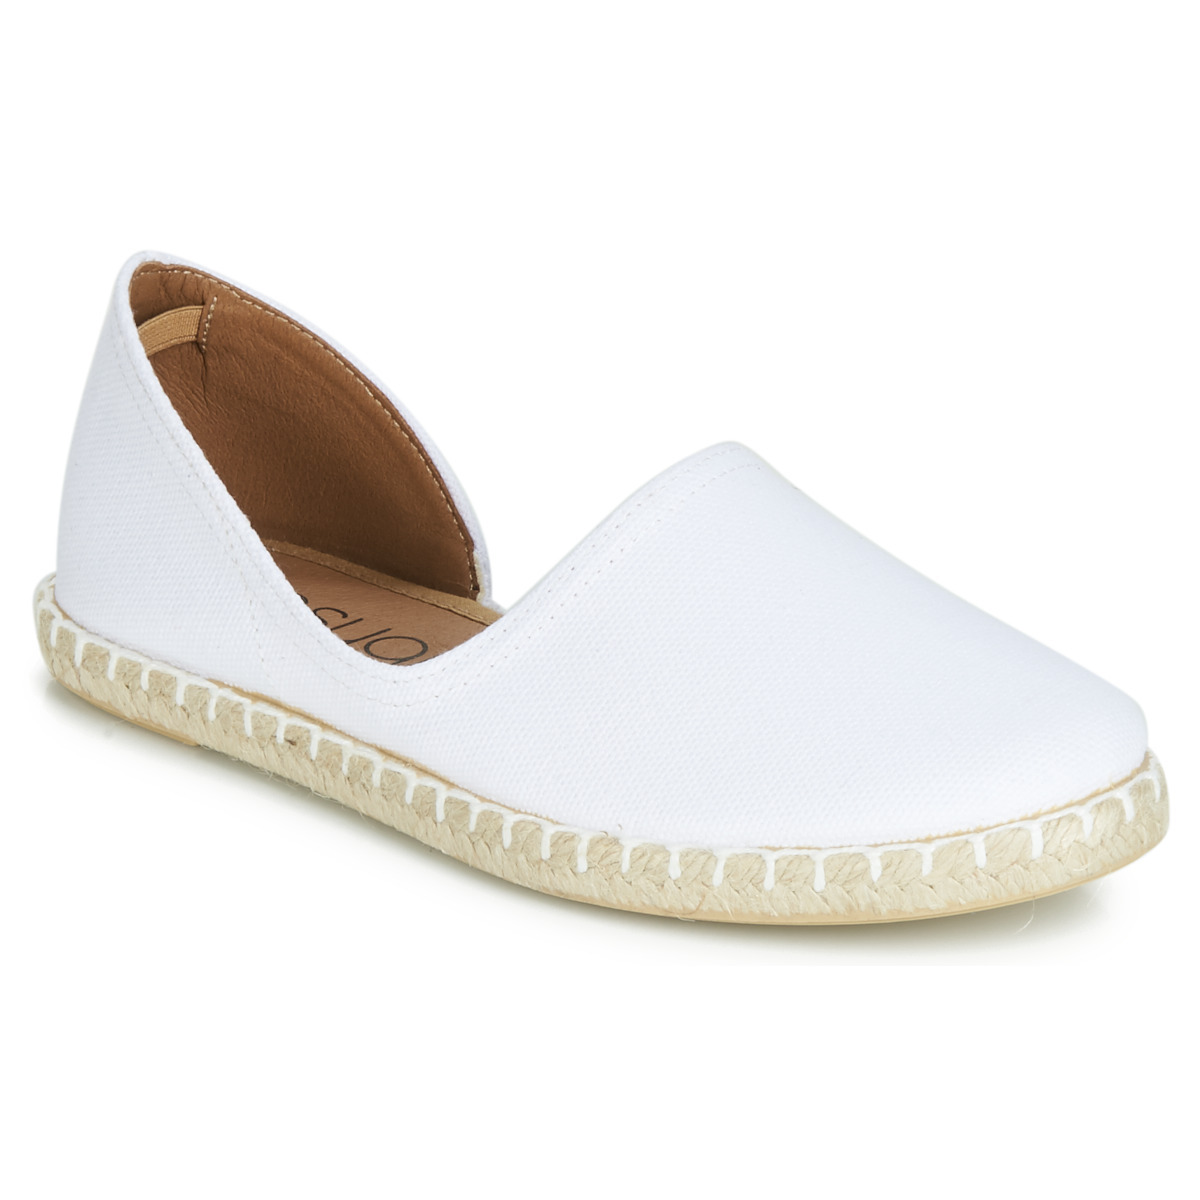 Casualtitude Womens Sandals in White at Spartoo GOOFASH